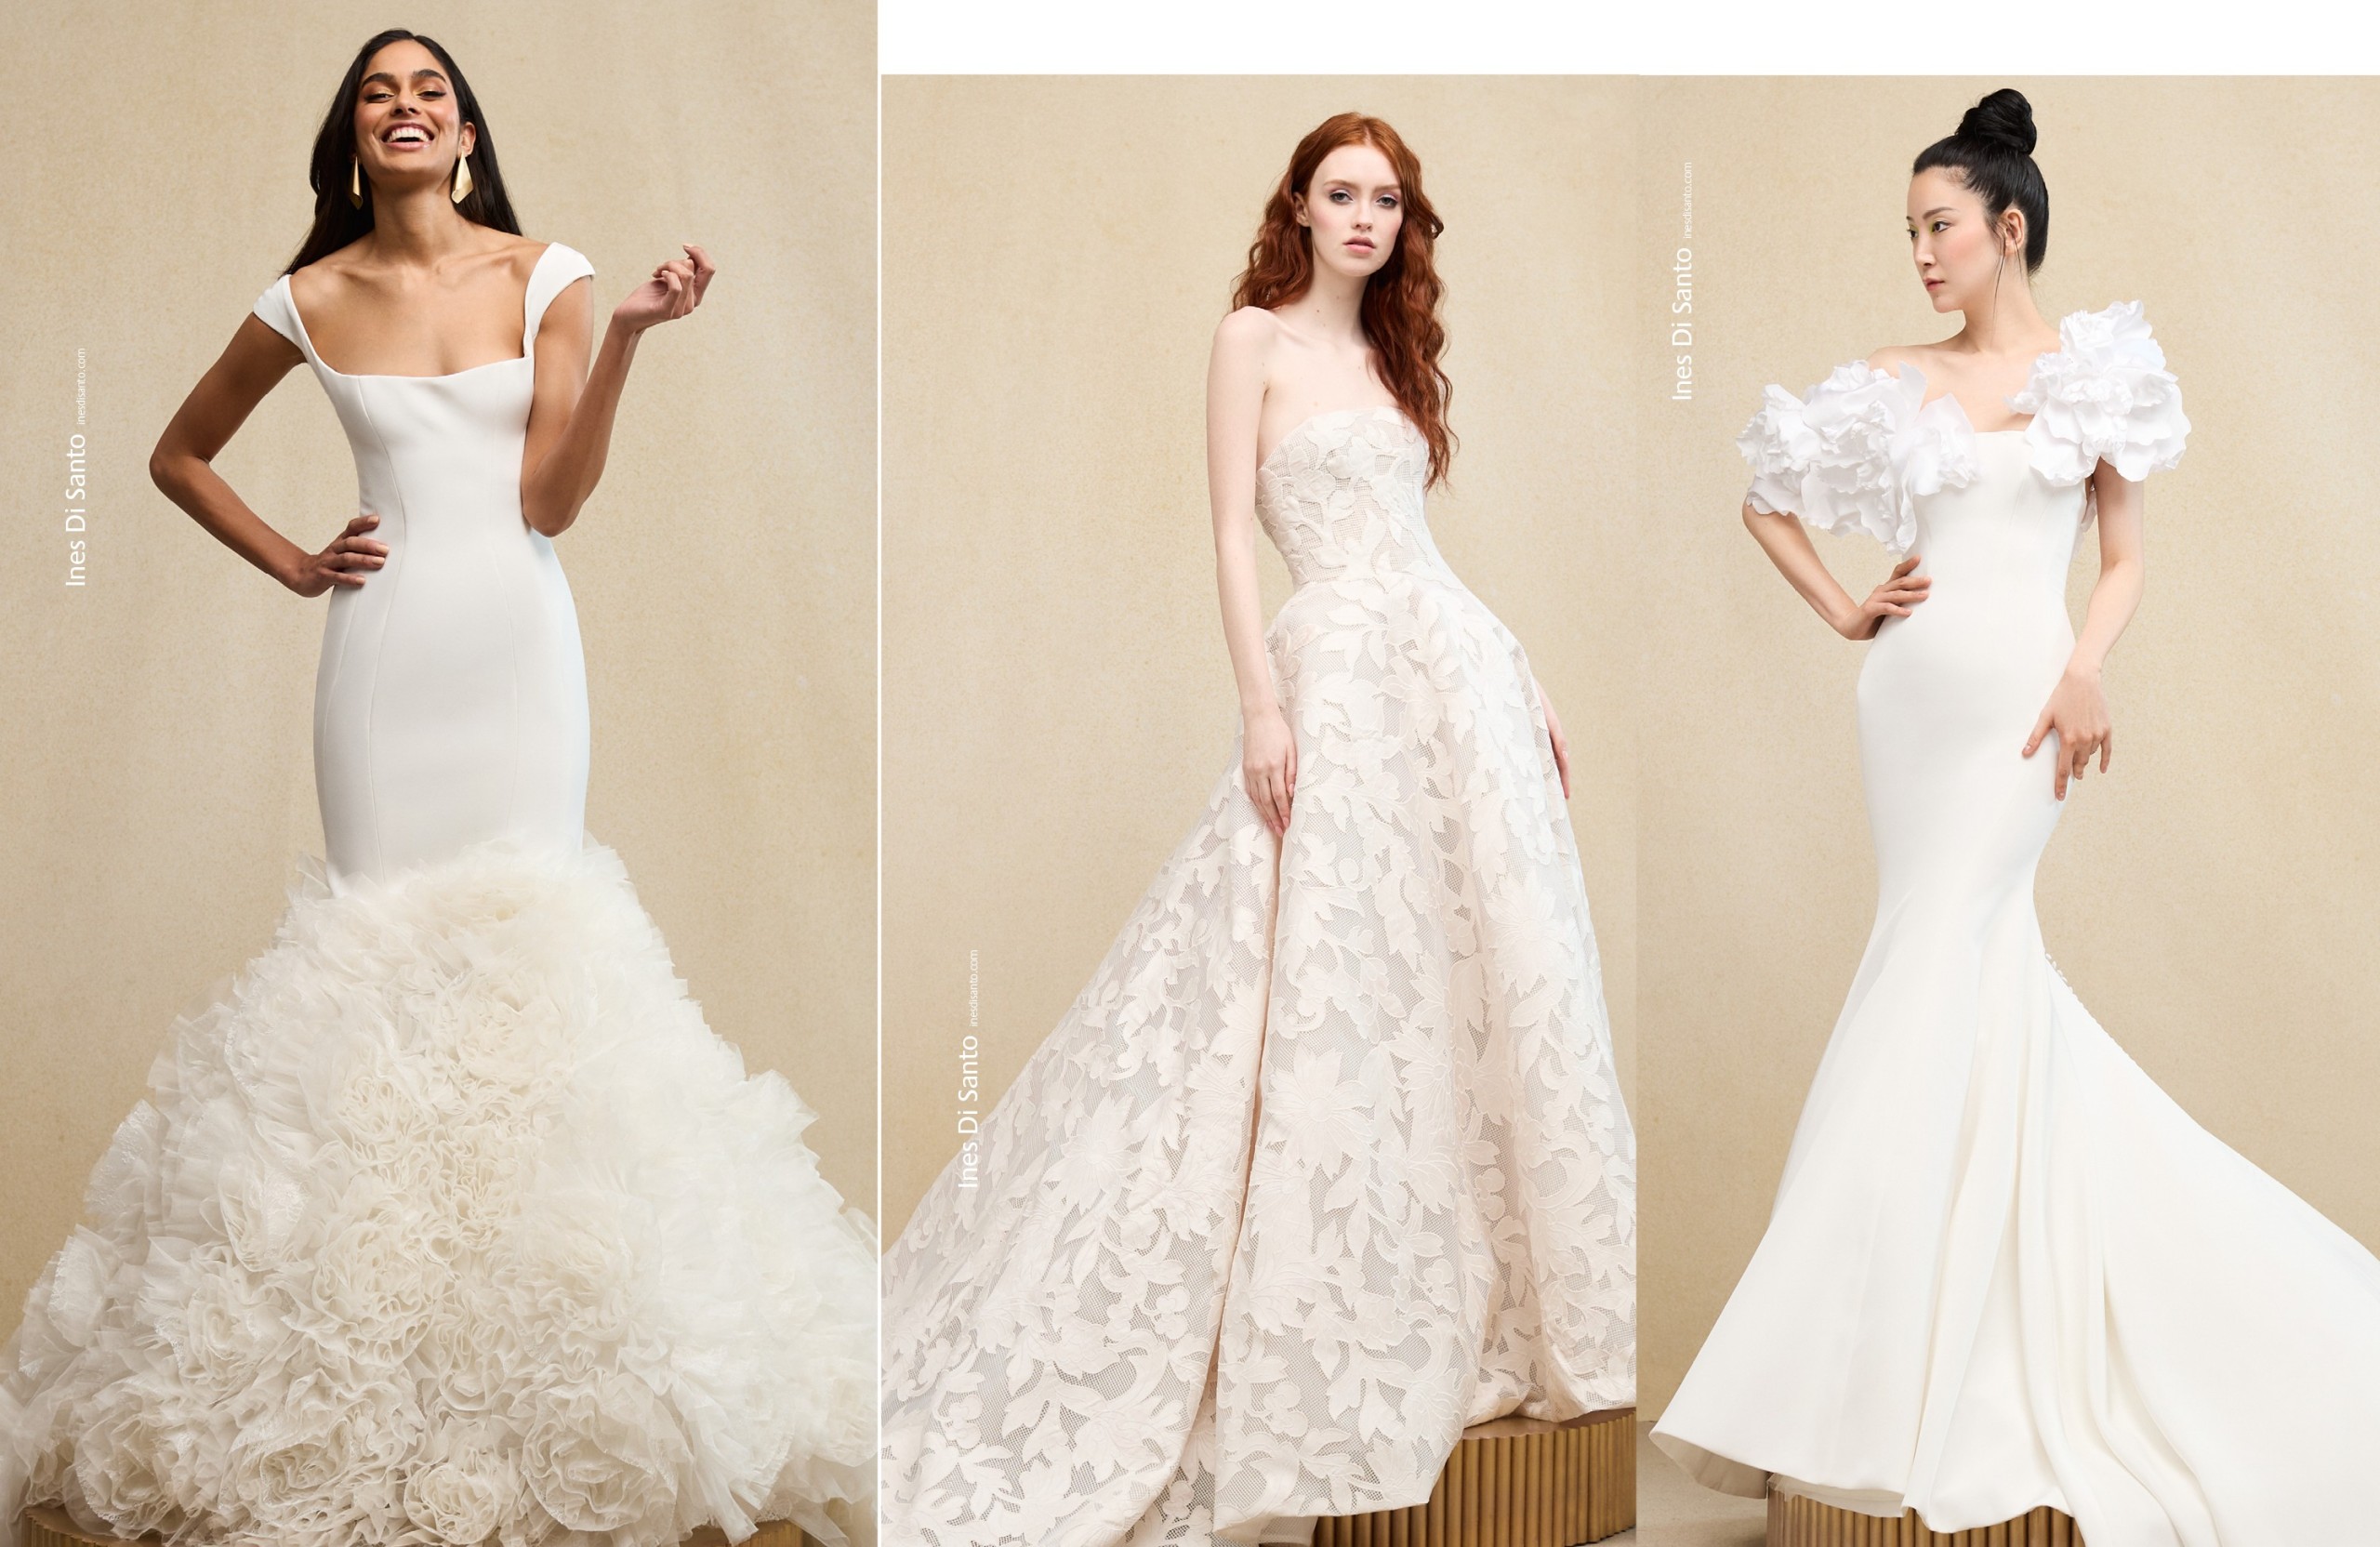 Best Christian Bridal Gowns Spotted On Real Brides For White Weddings!